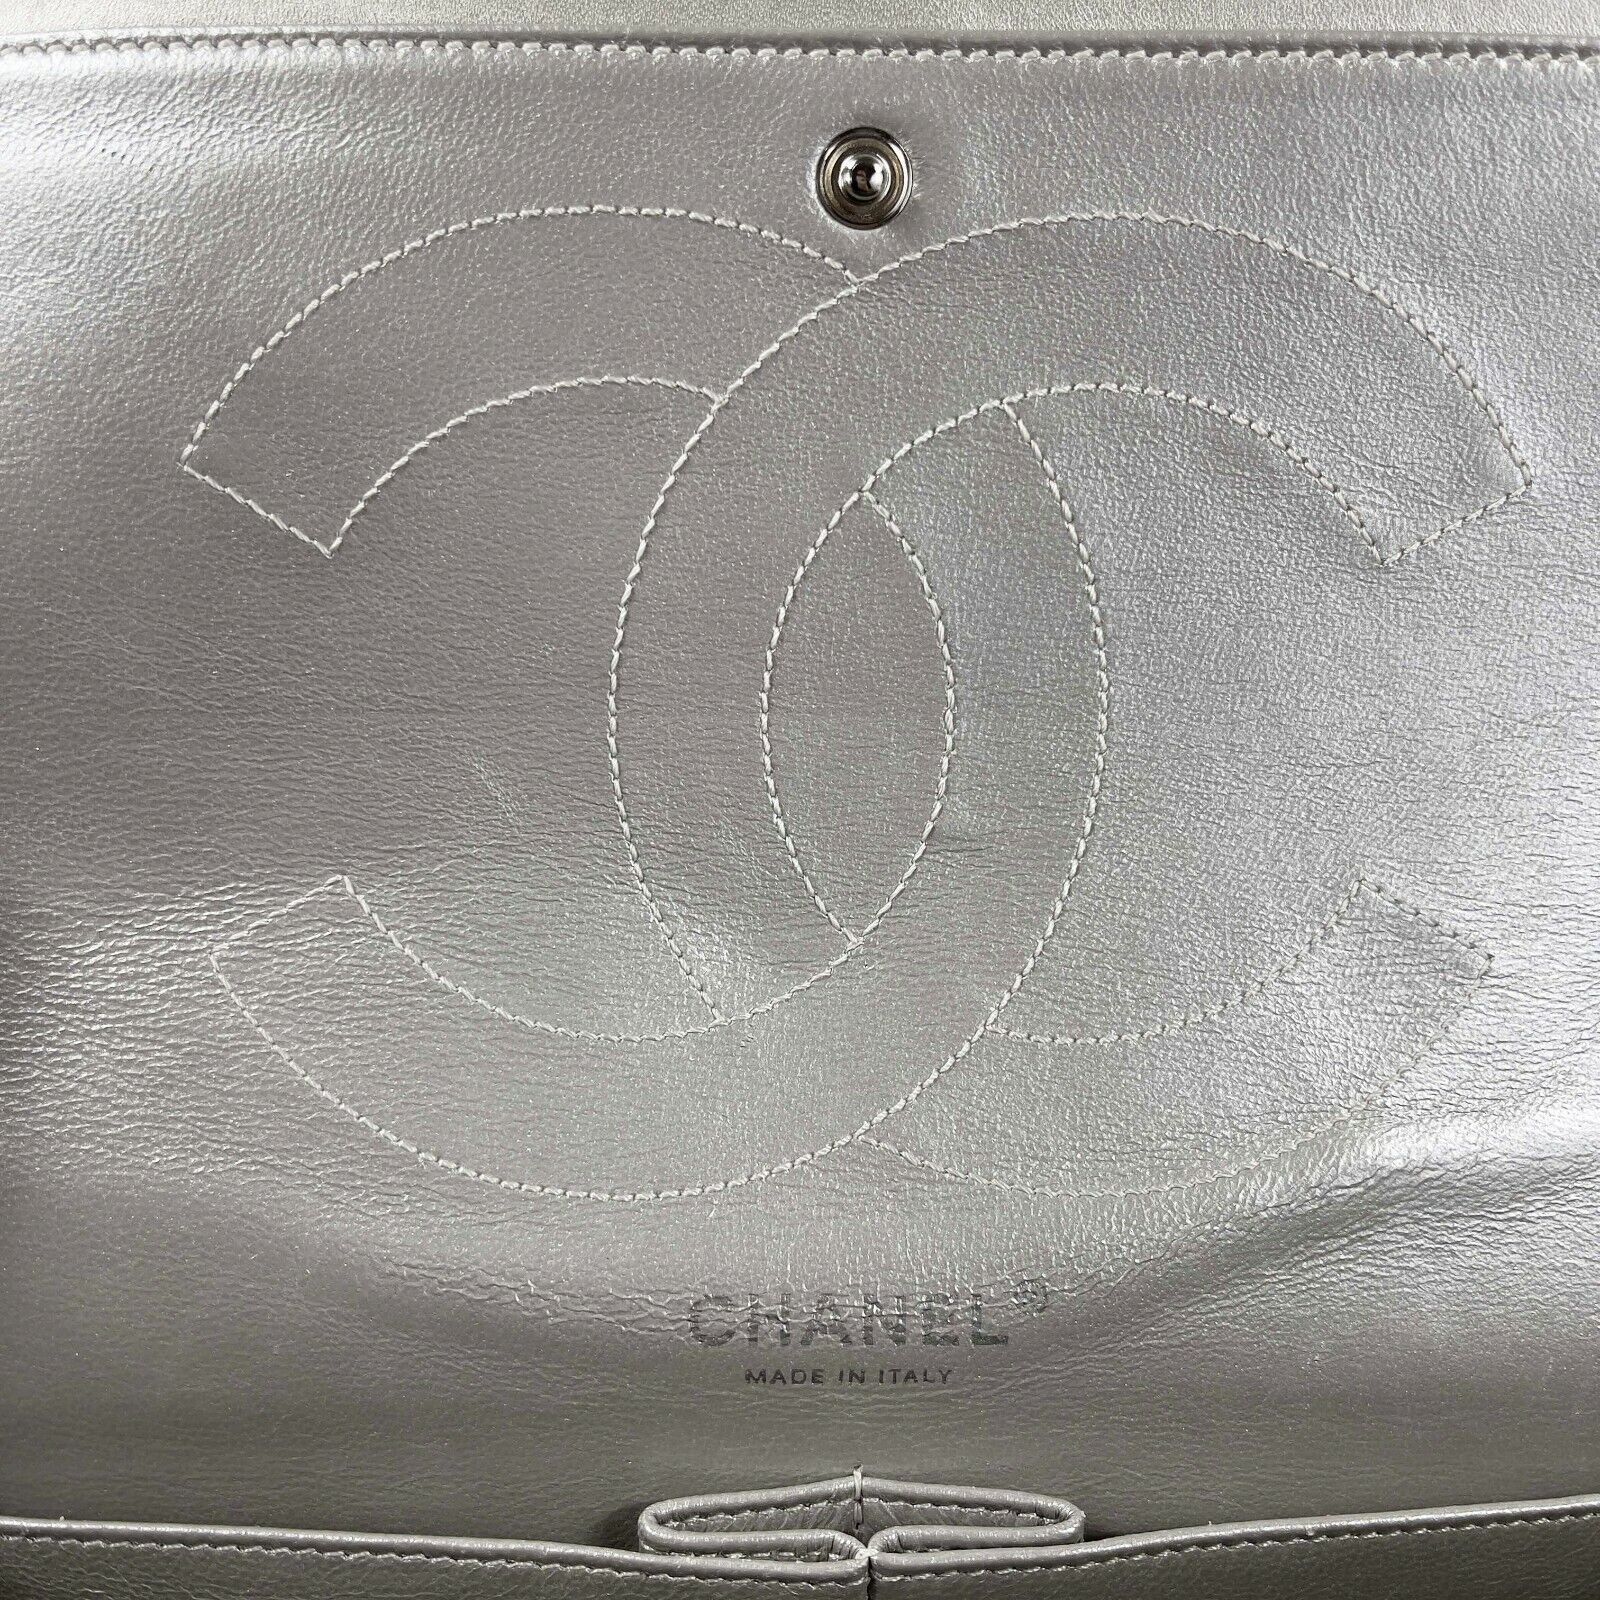 CHANEL - Metallic Calfskin Quilted 2.55 Reissue 227 Double Flap